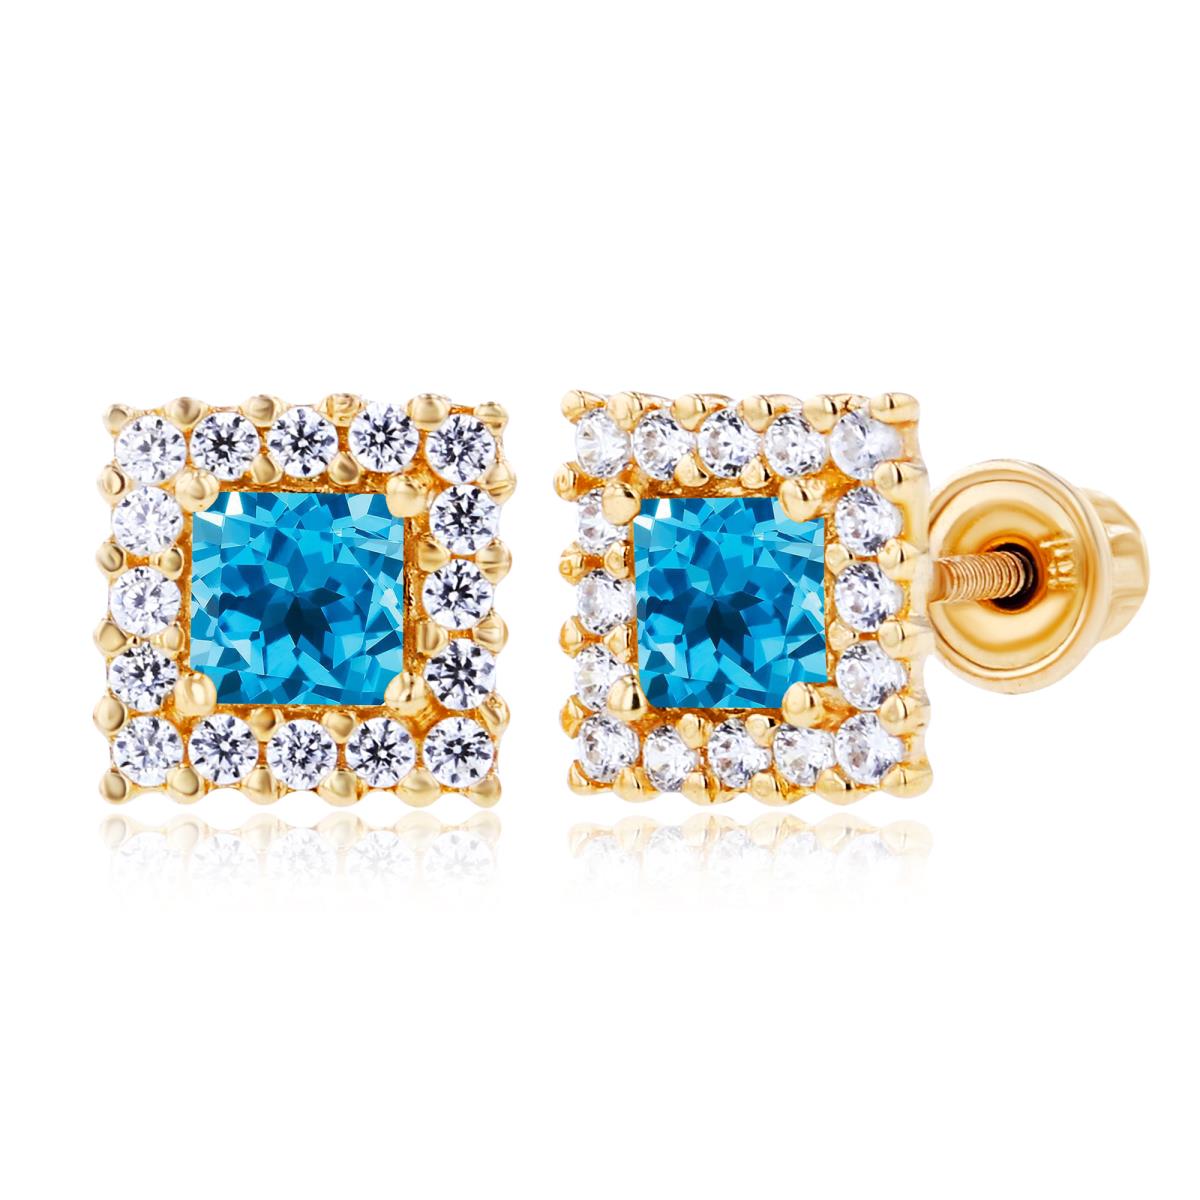 Sterling Silver Yellow 3mm Square Swiss Blue Topaz & 1mm Created White Sapphire Square Screwback Earrings